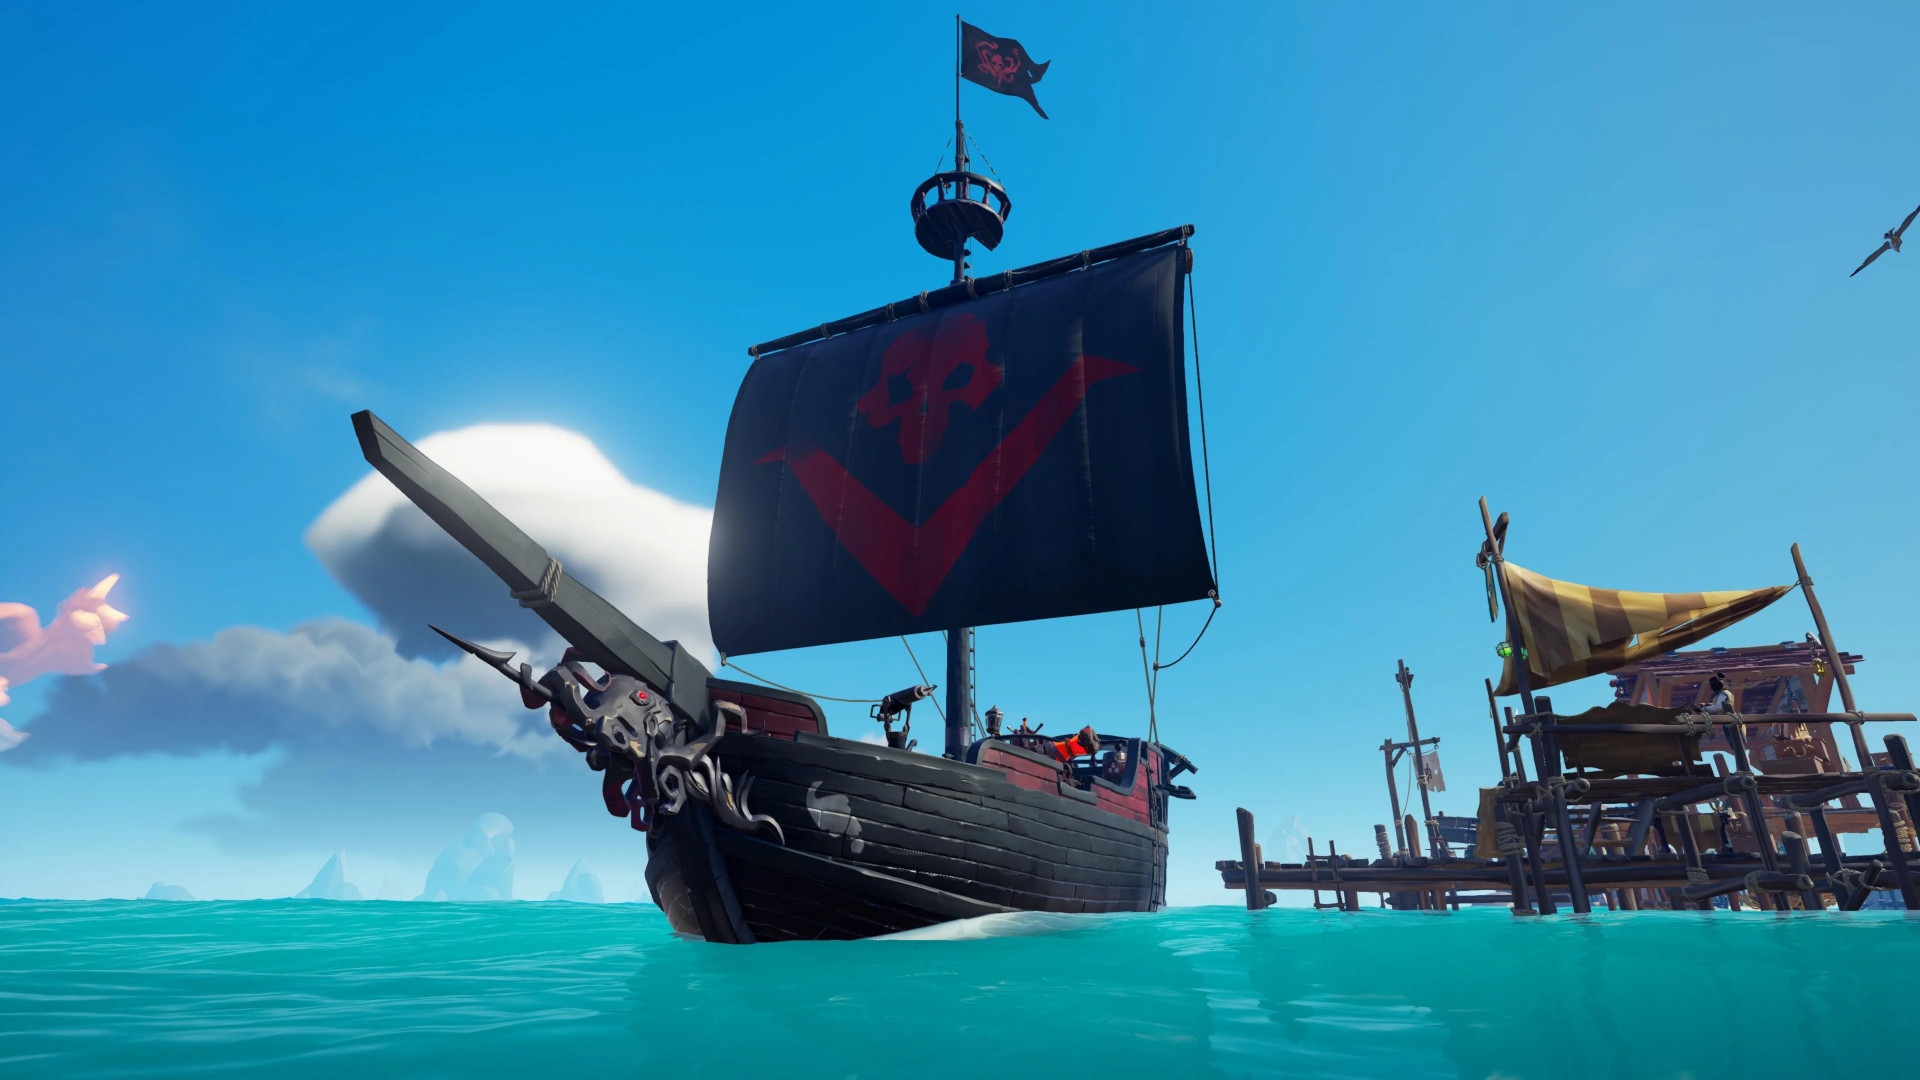 Sea of Thieves - Sails of the Bonny Belle DLC XBOX One / Windows 10 CD Key, $89.27